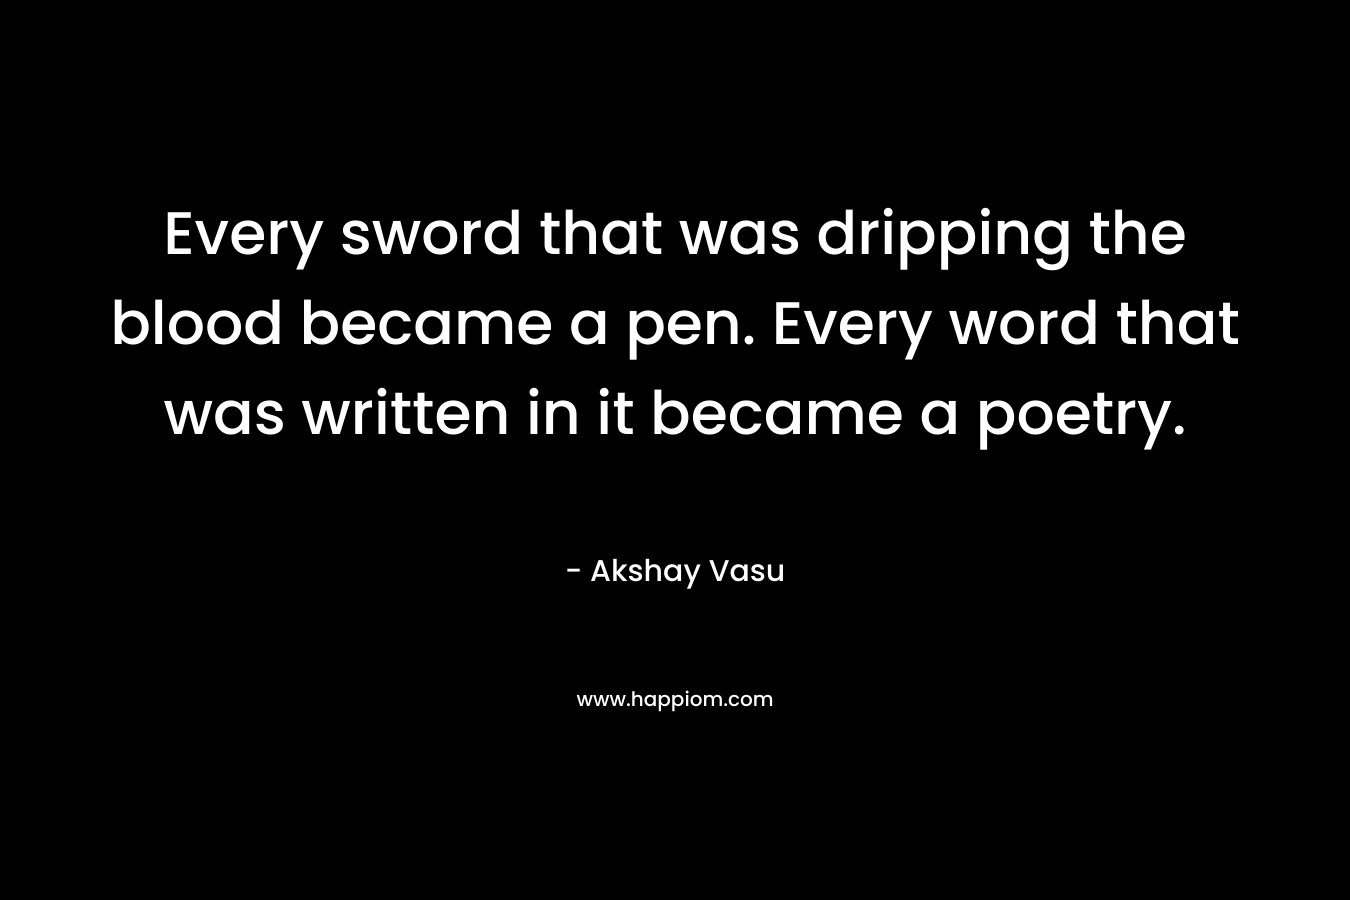 Every sword that was dripping the blood became a pen. Every word that was written in it became a poetry.